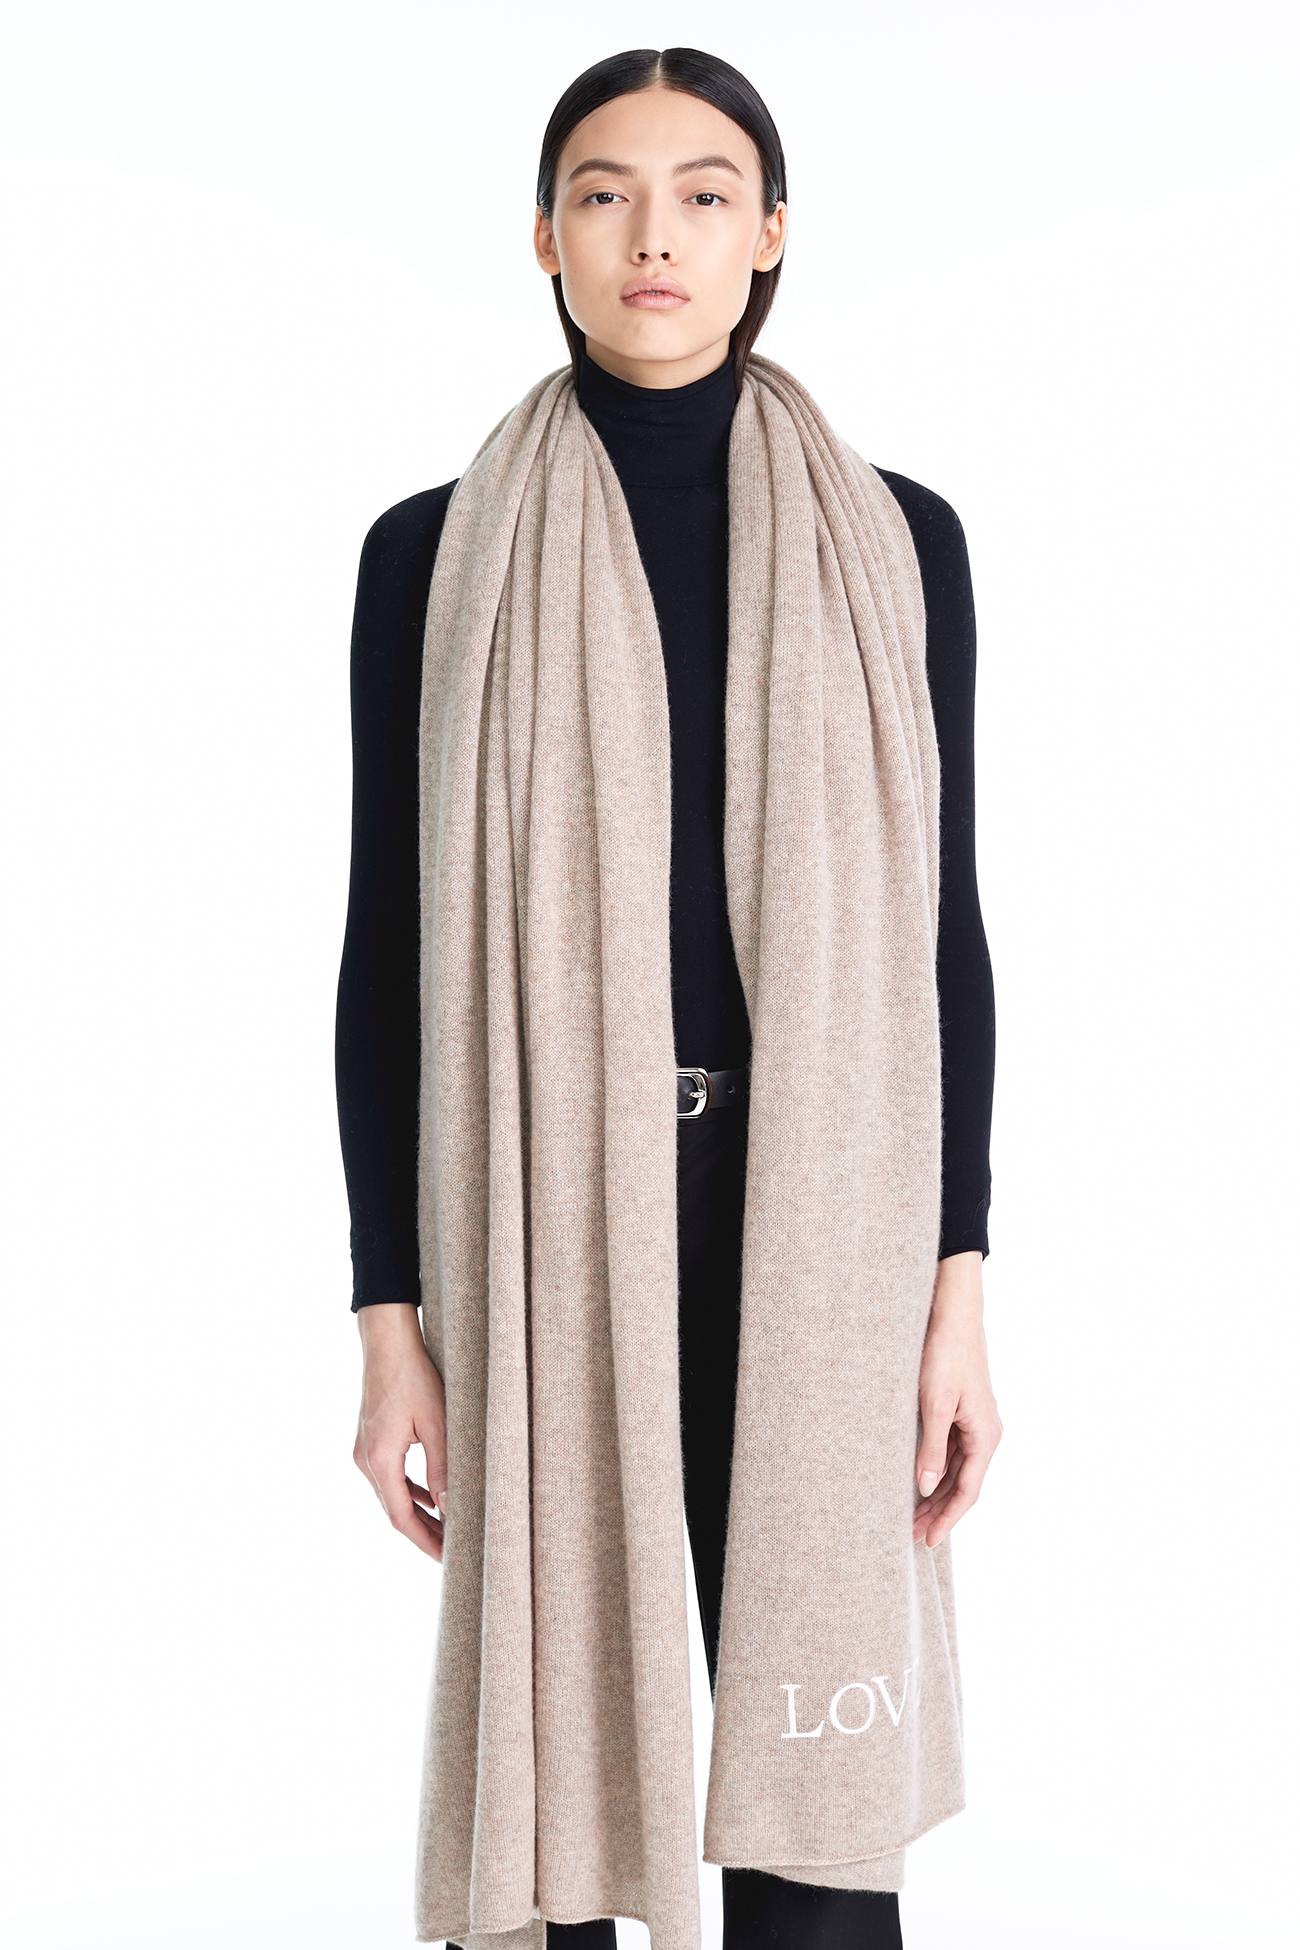 Cashmere Scarf- Pink - Love Me